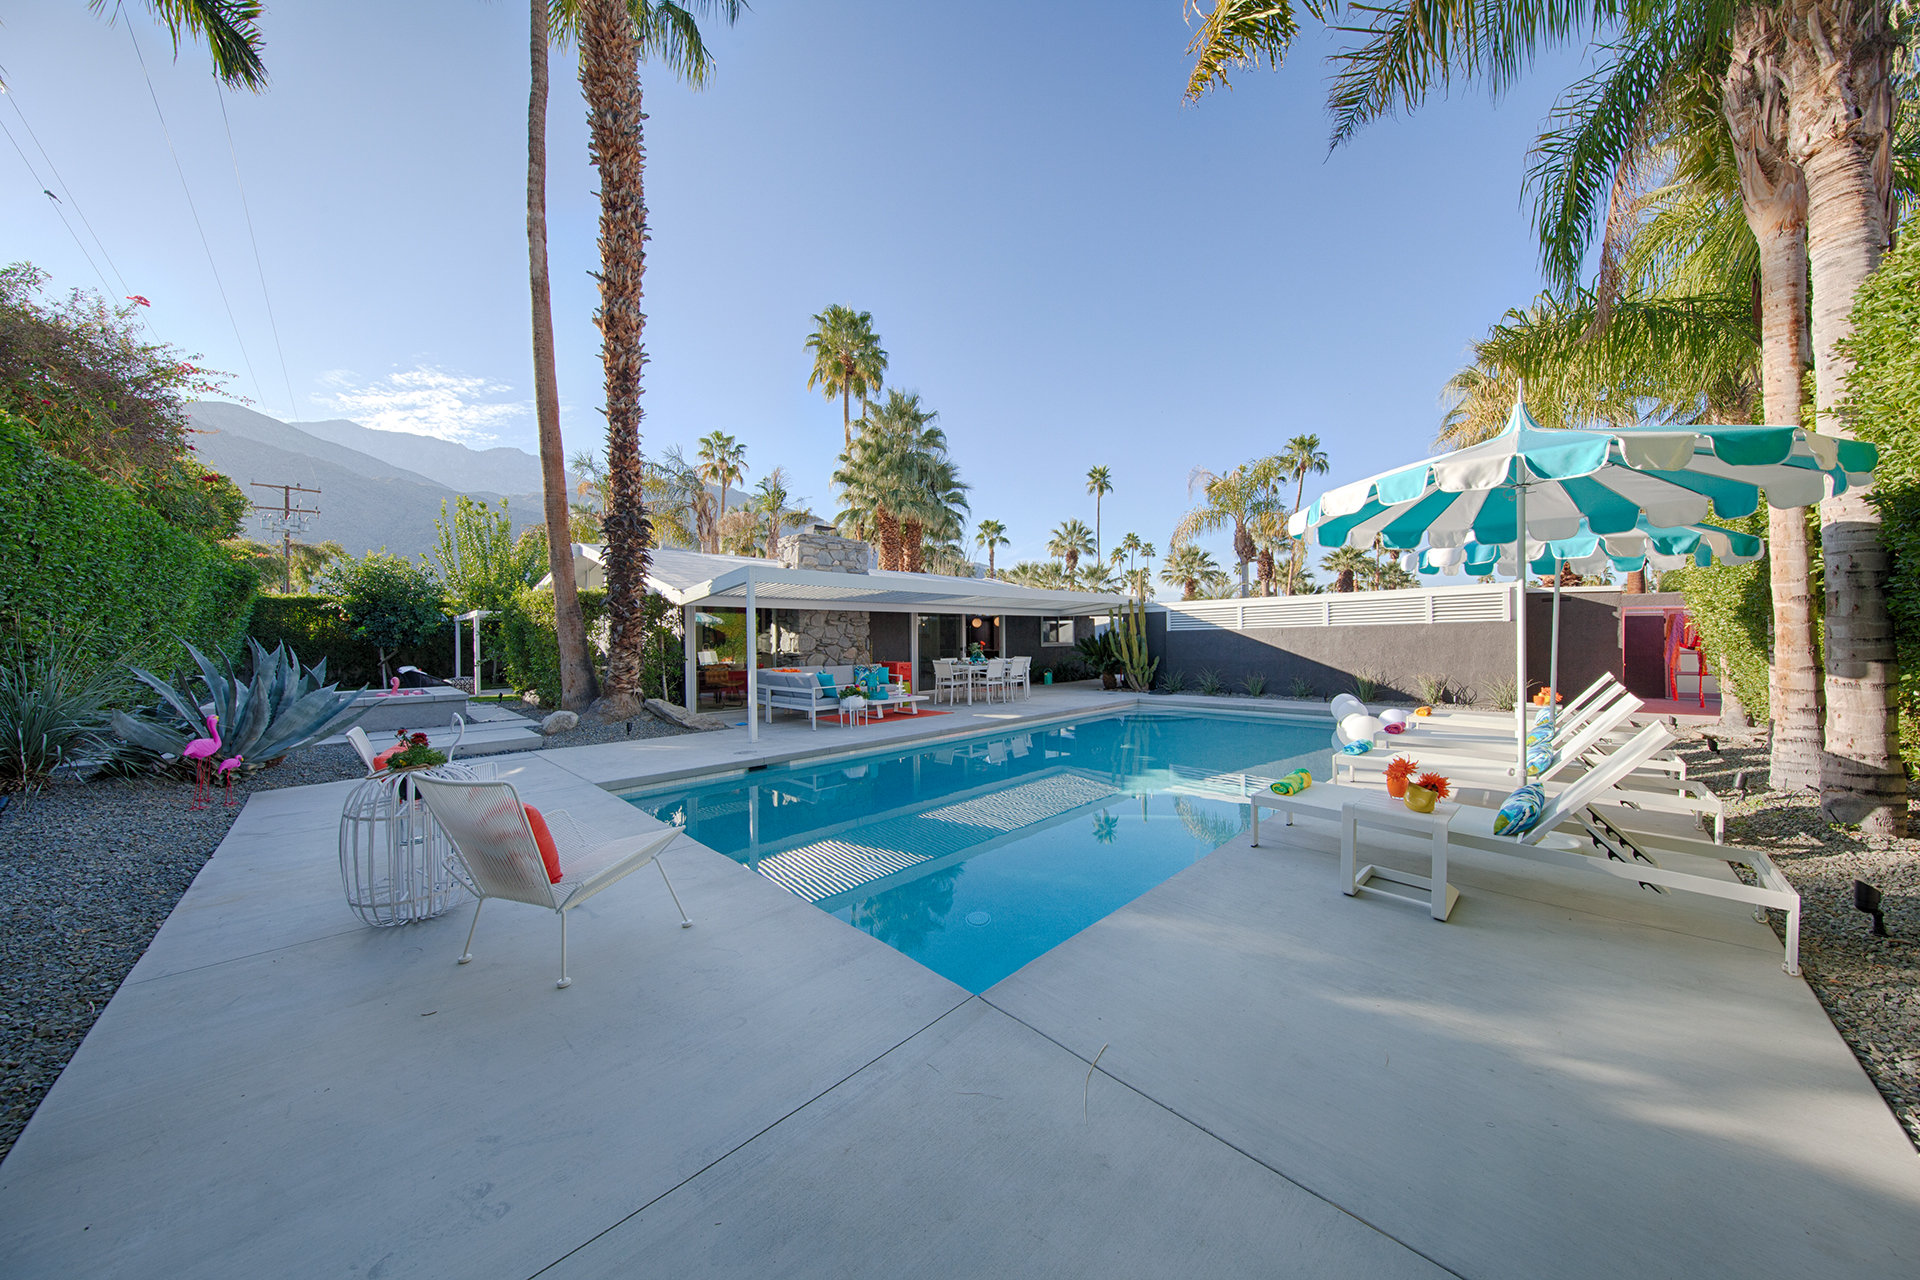 The backyard of an Alexander home in Twin Palms